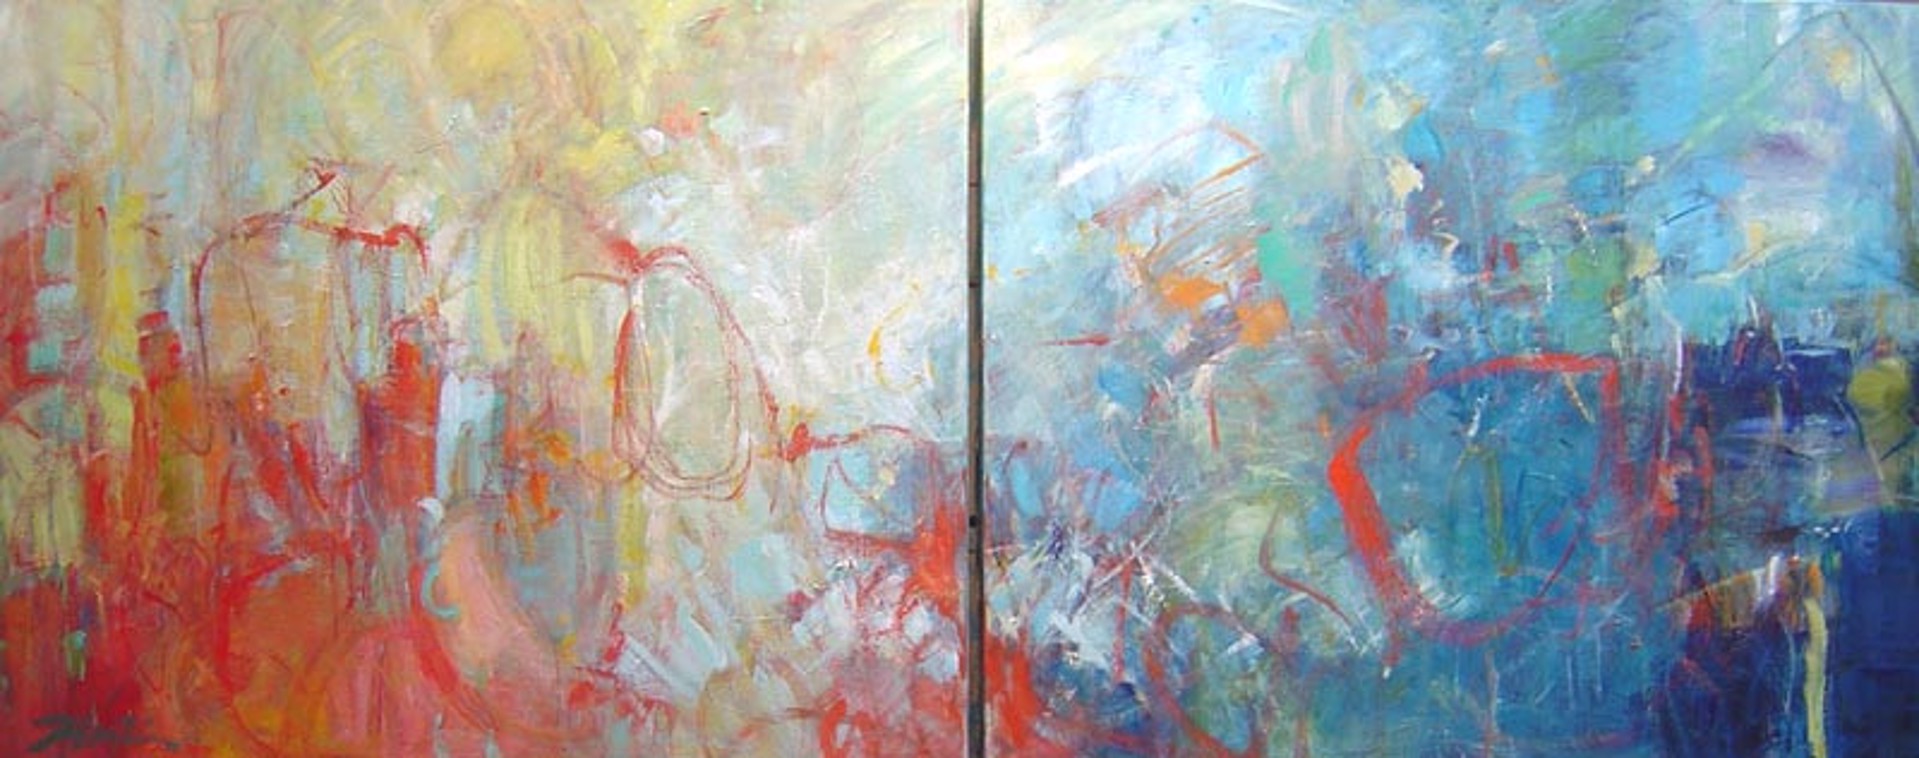 Discovery Diptych by Debbie Martin